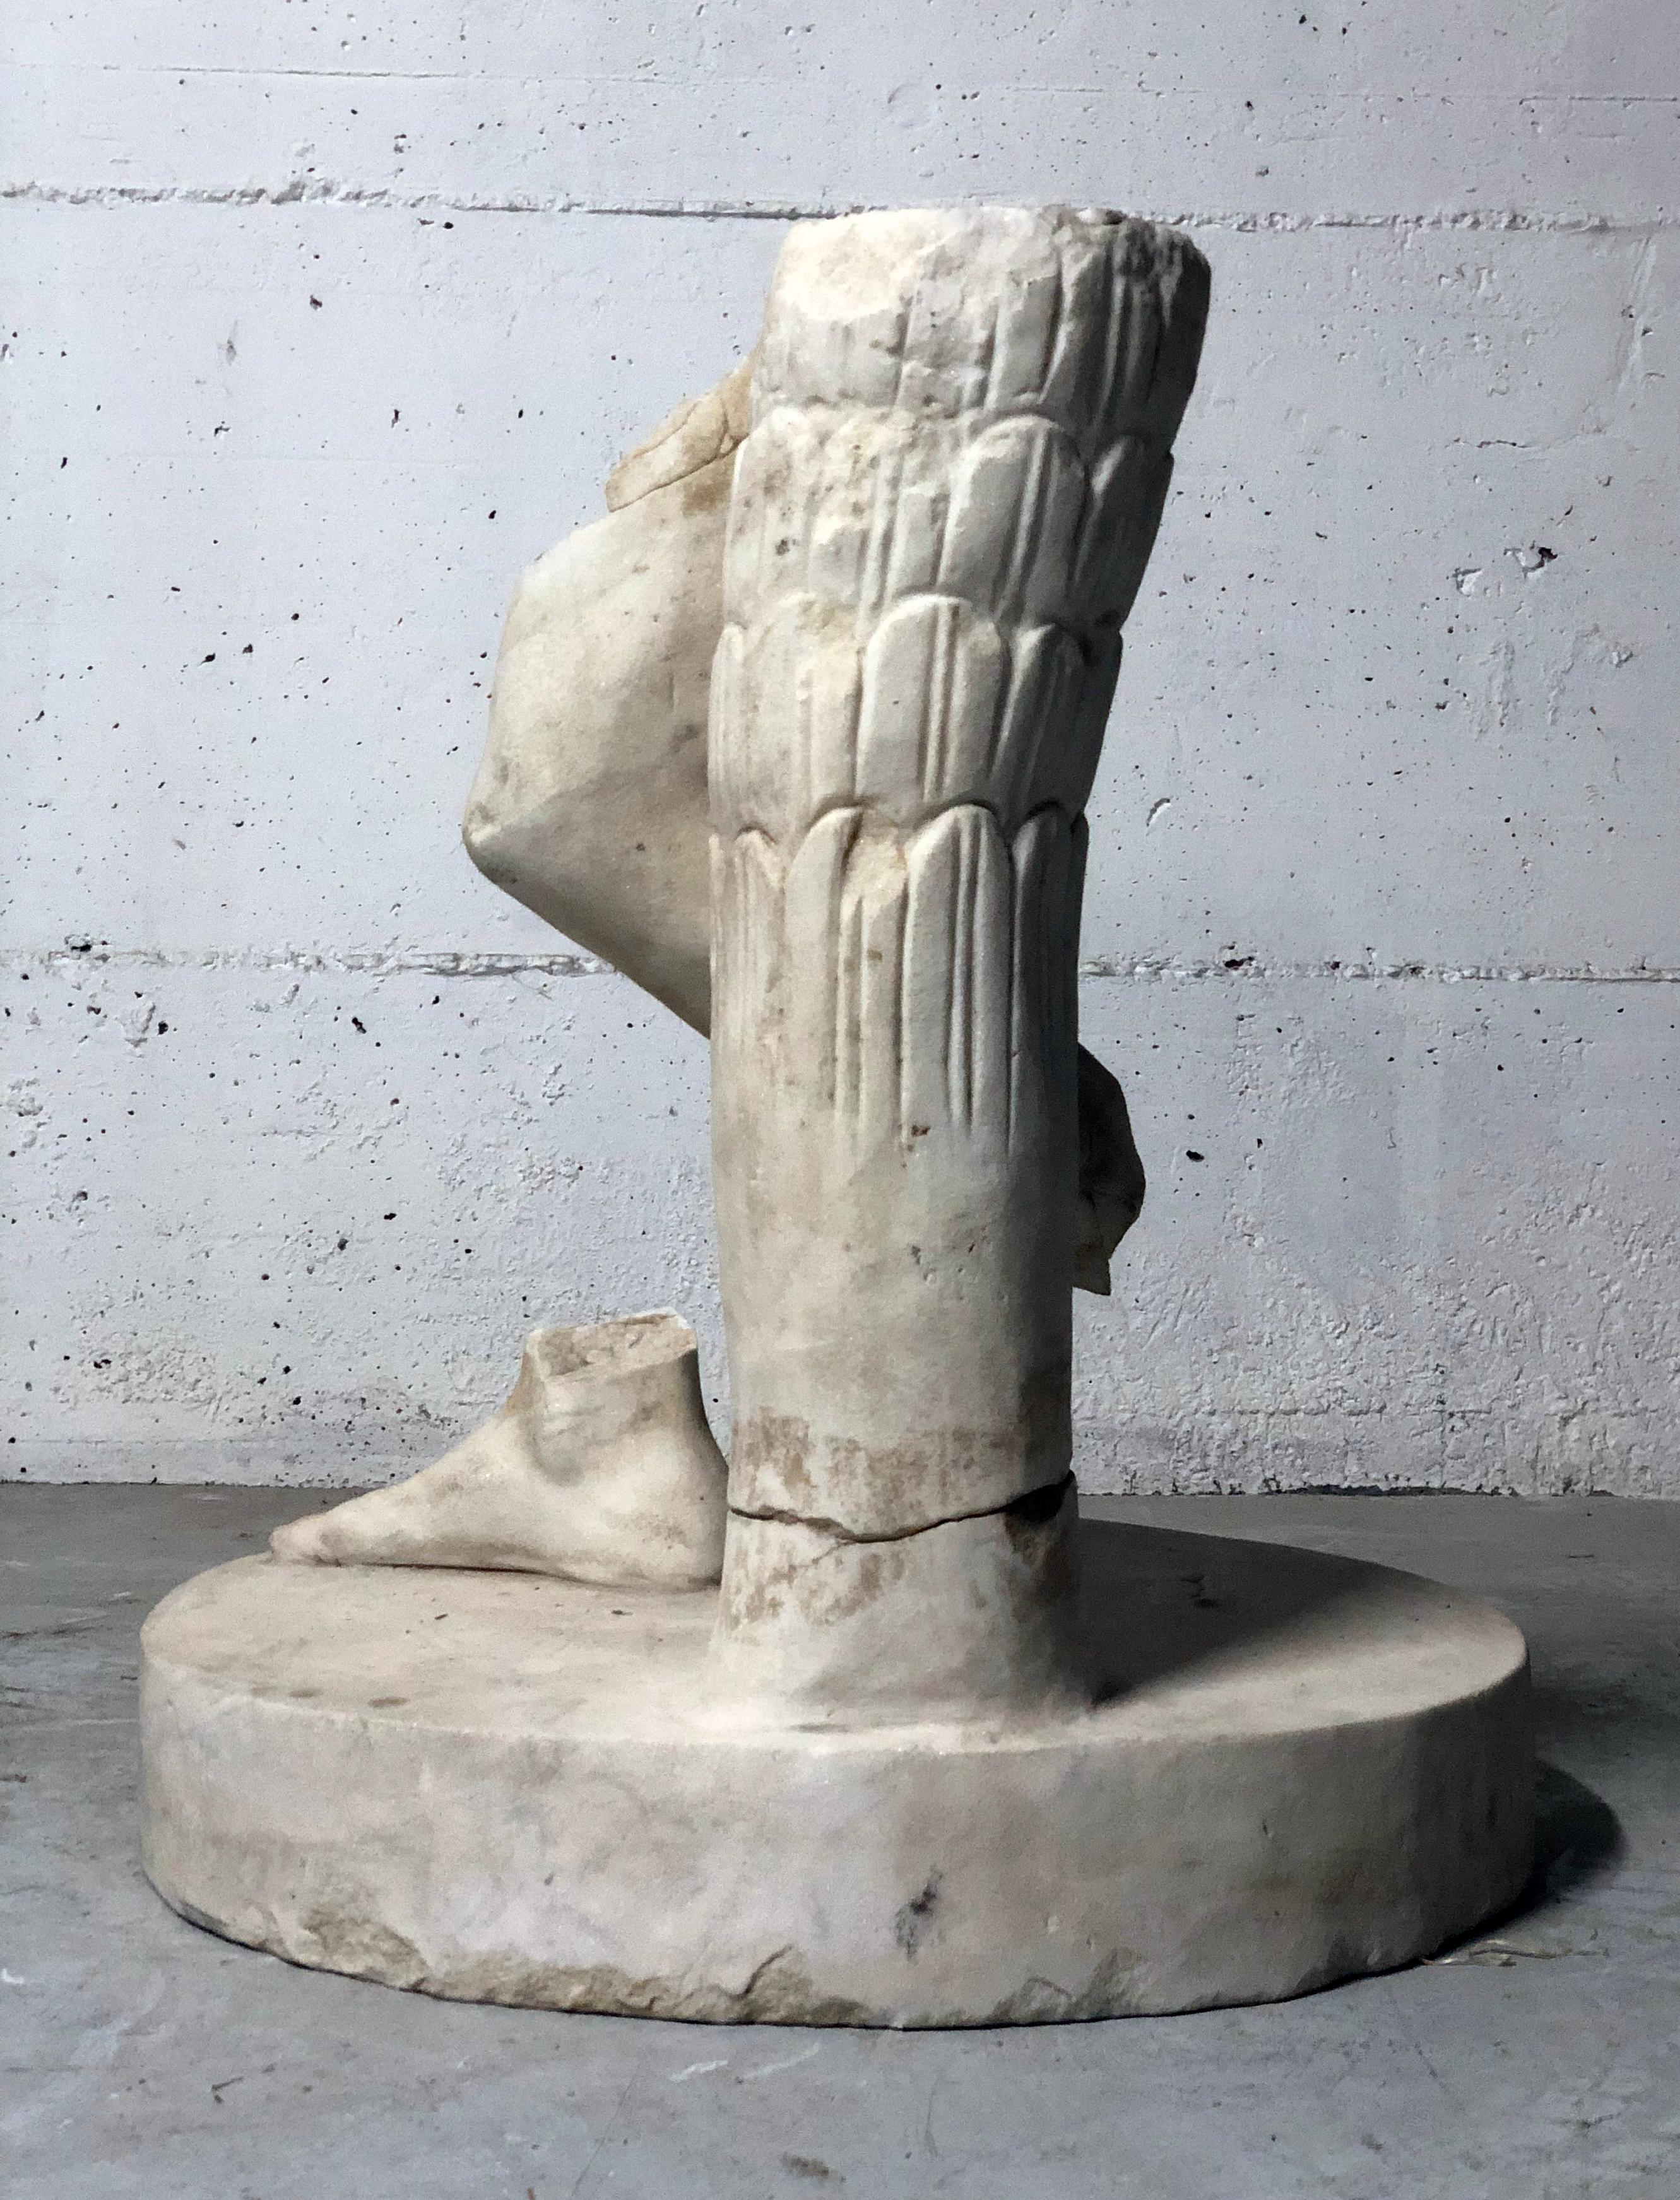 19th Century Roman White Marble Lifesize Fragment Torso Sculpture Legs and Feet - Black Figurative Sculpture by Unknown